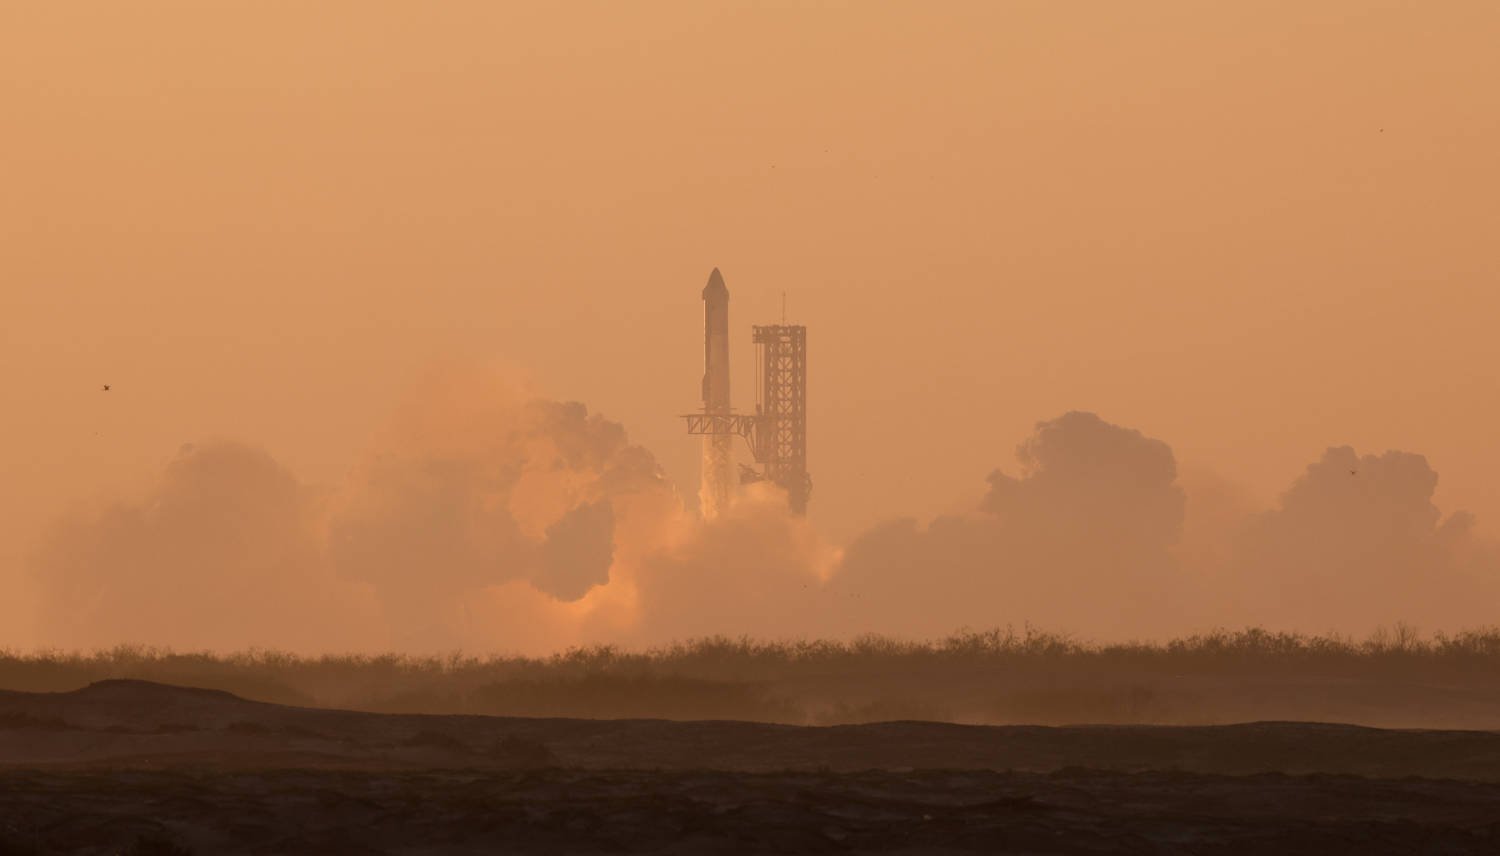 Spacex's Next Generation Starship Spacecraft Lifts Off From Launchpad, Near Brownsville